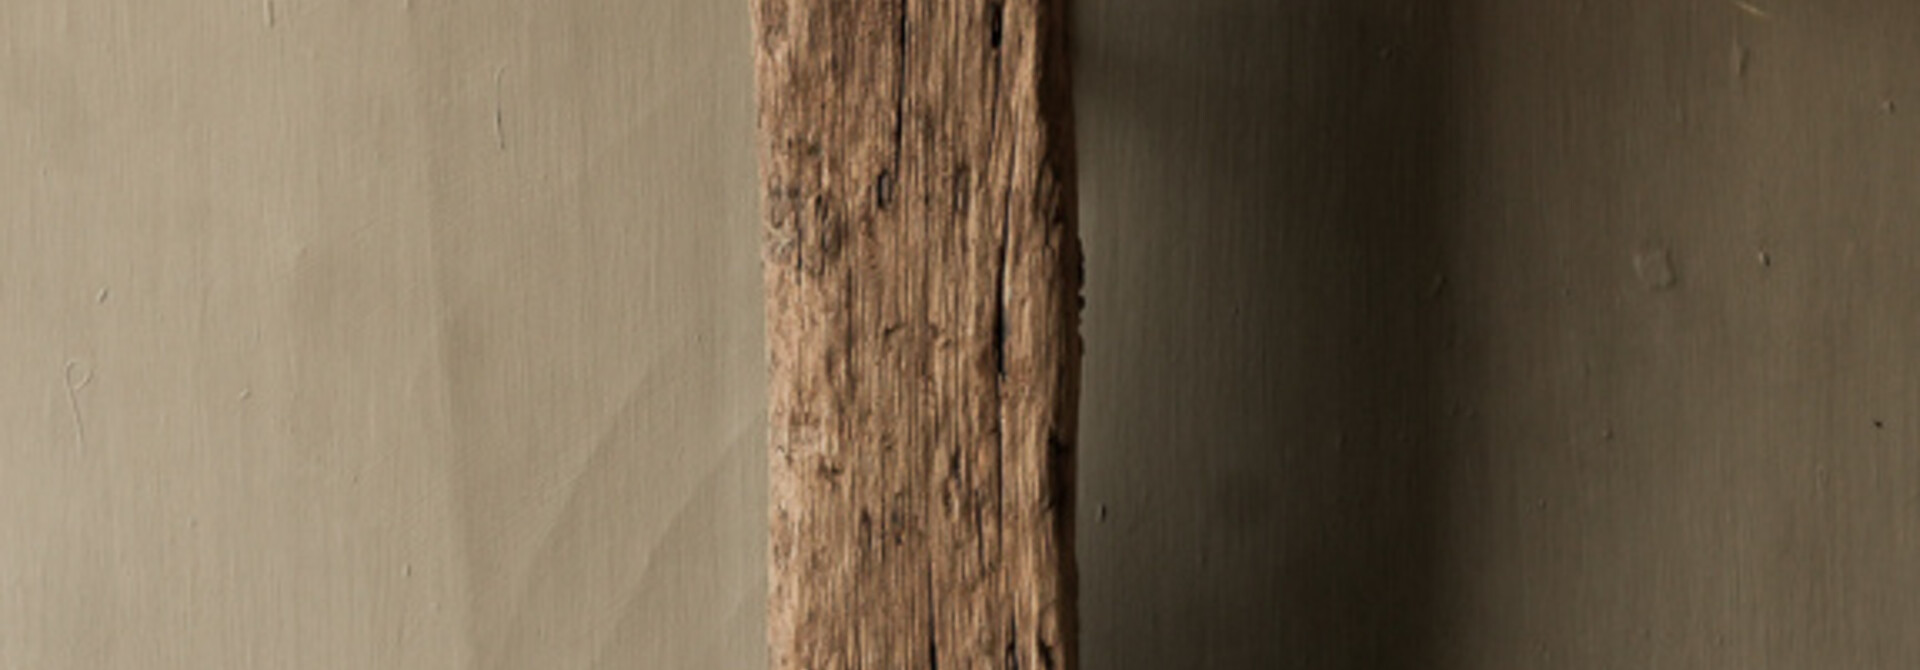 Beautifully sturdy old wooden old beam wall lamp